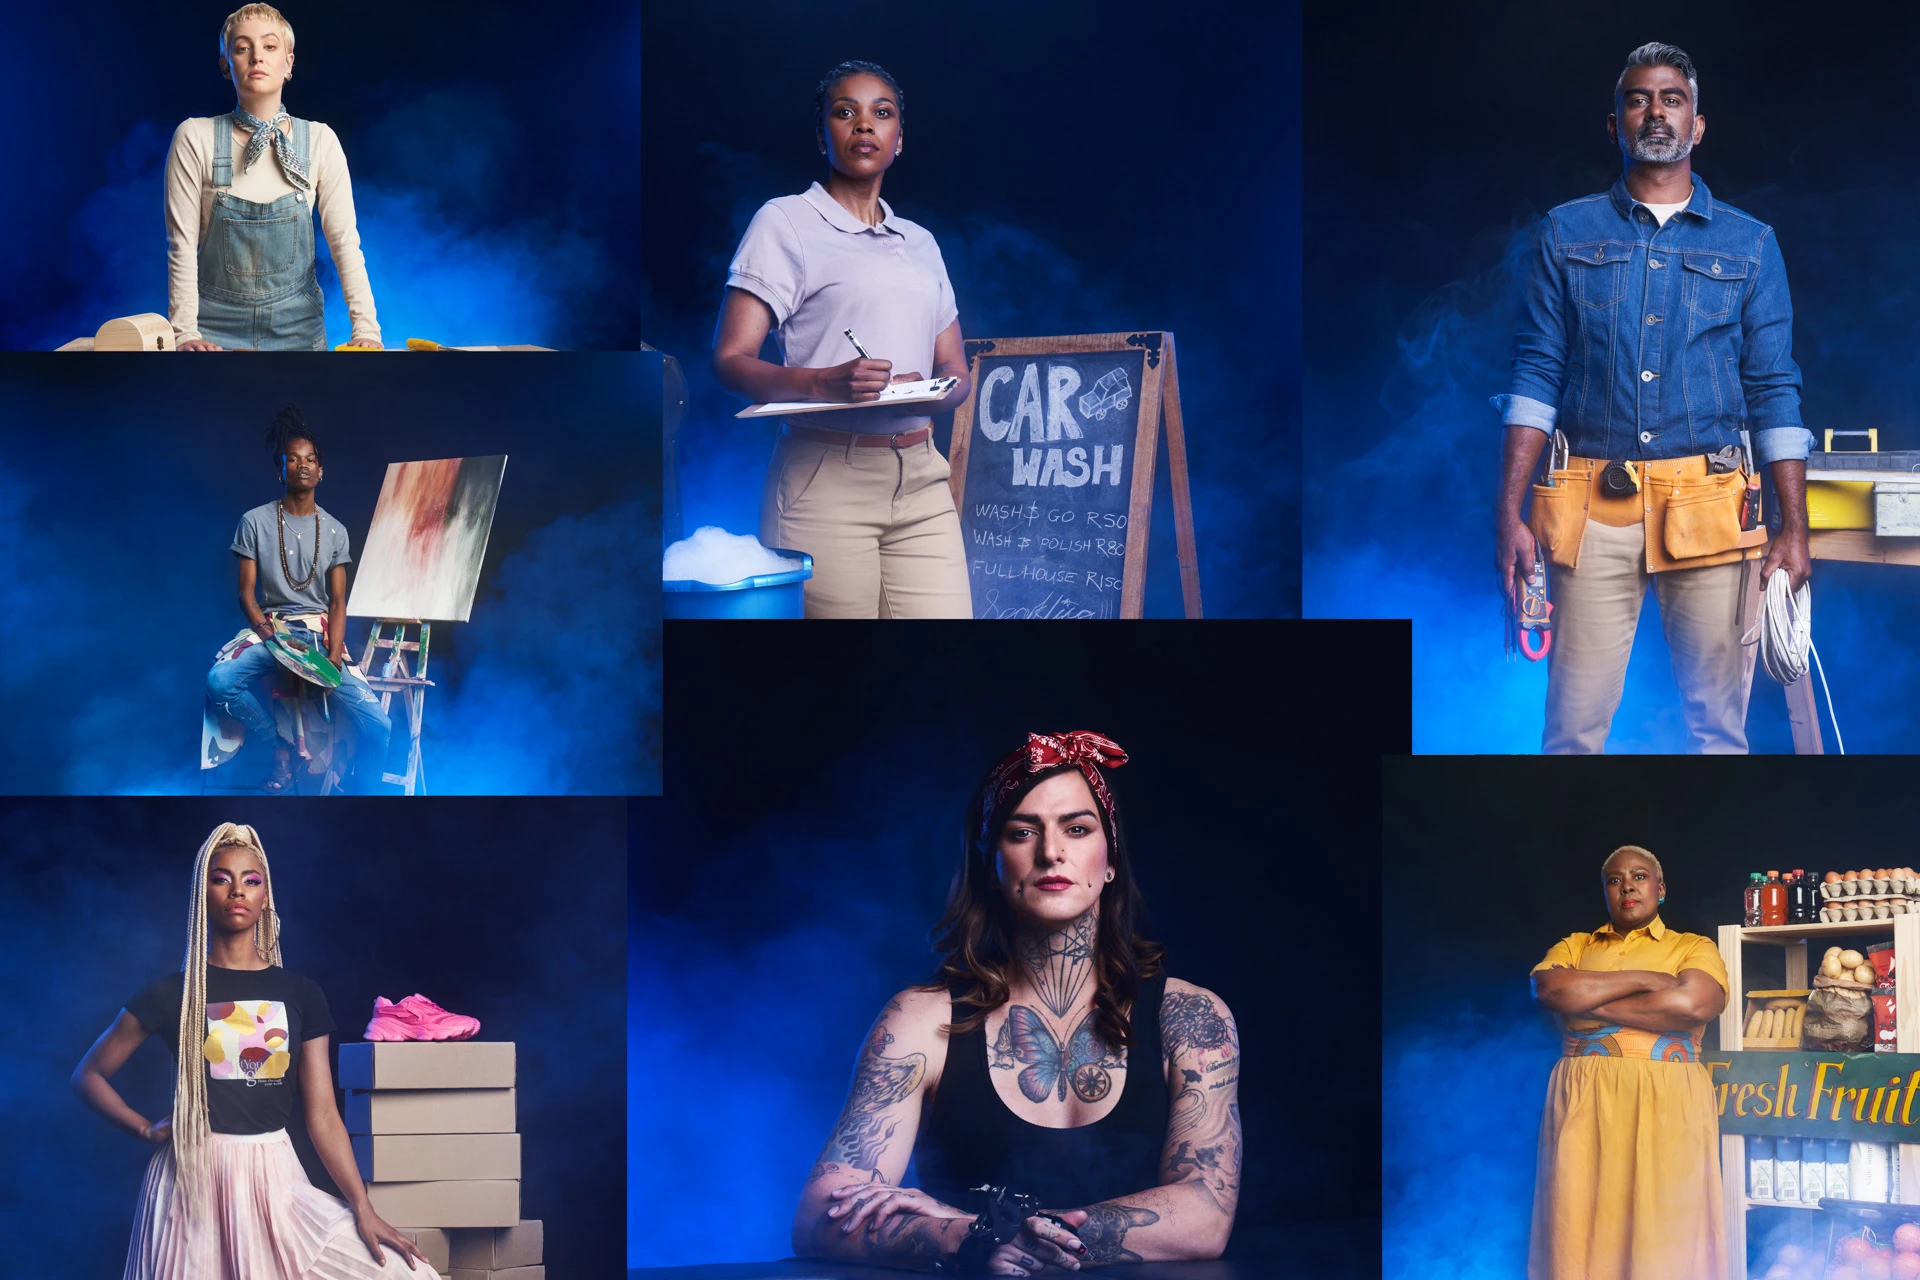 Montage of diverse individuals representing various professions: a woodworker, a car wash operator, an electrician, an artist, a fashion designer, a tattoo artist, and a grocer, all set against a dramatic blue background.